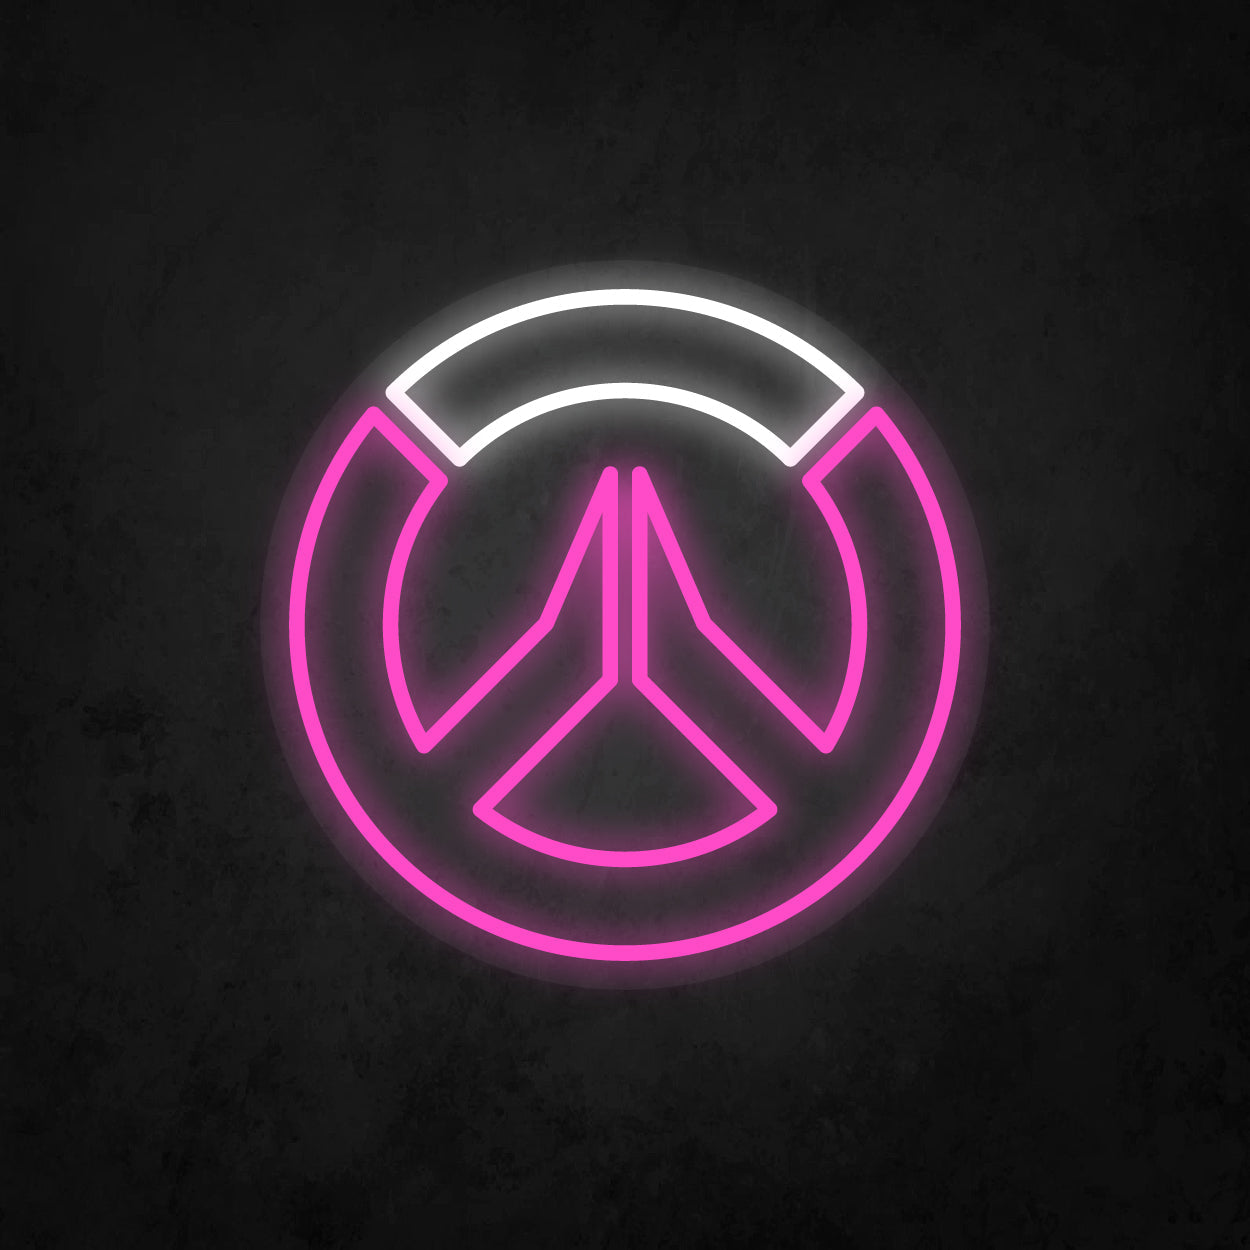 LED Neon Sign - Overwatch